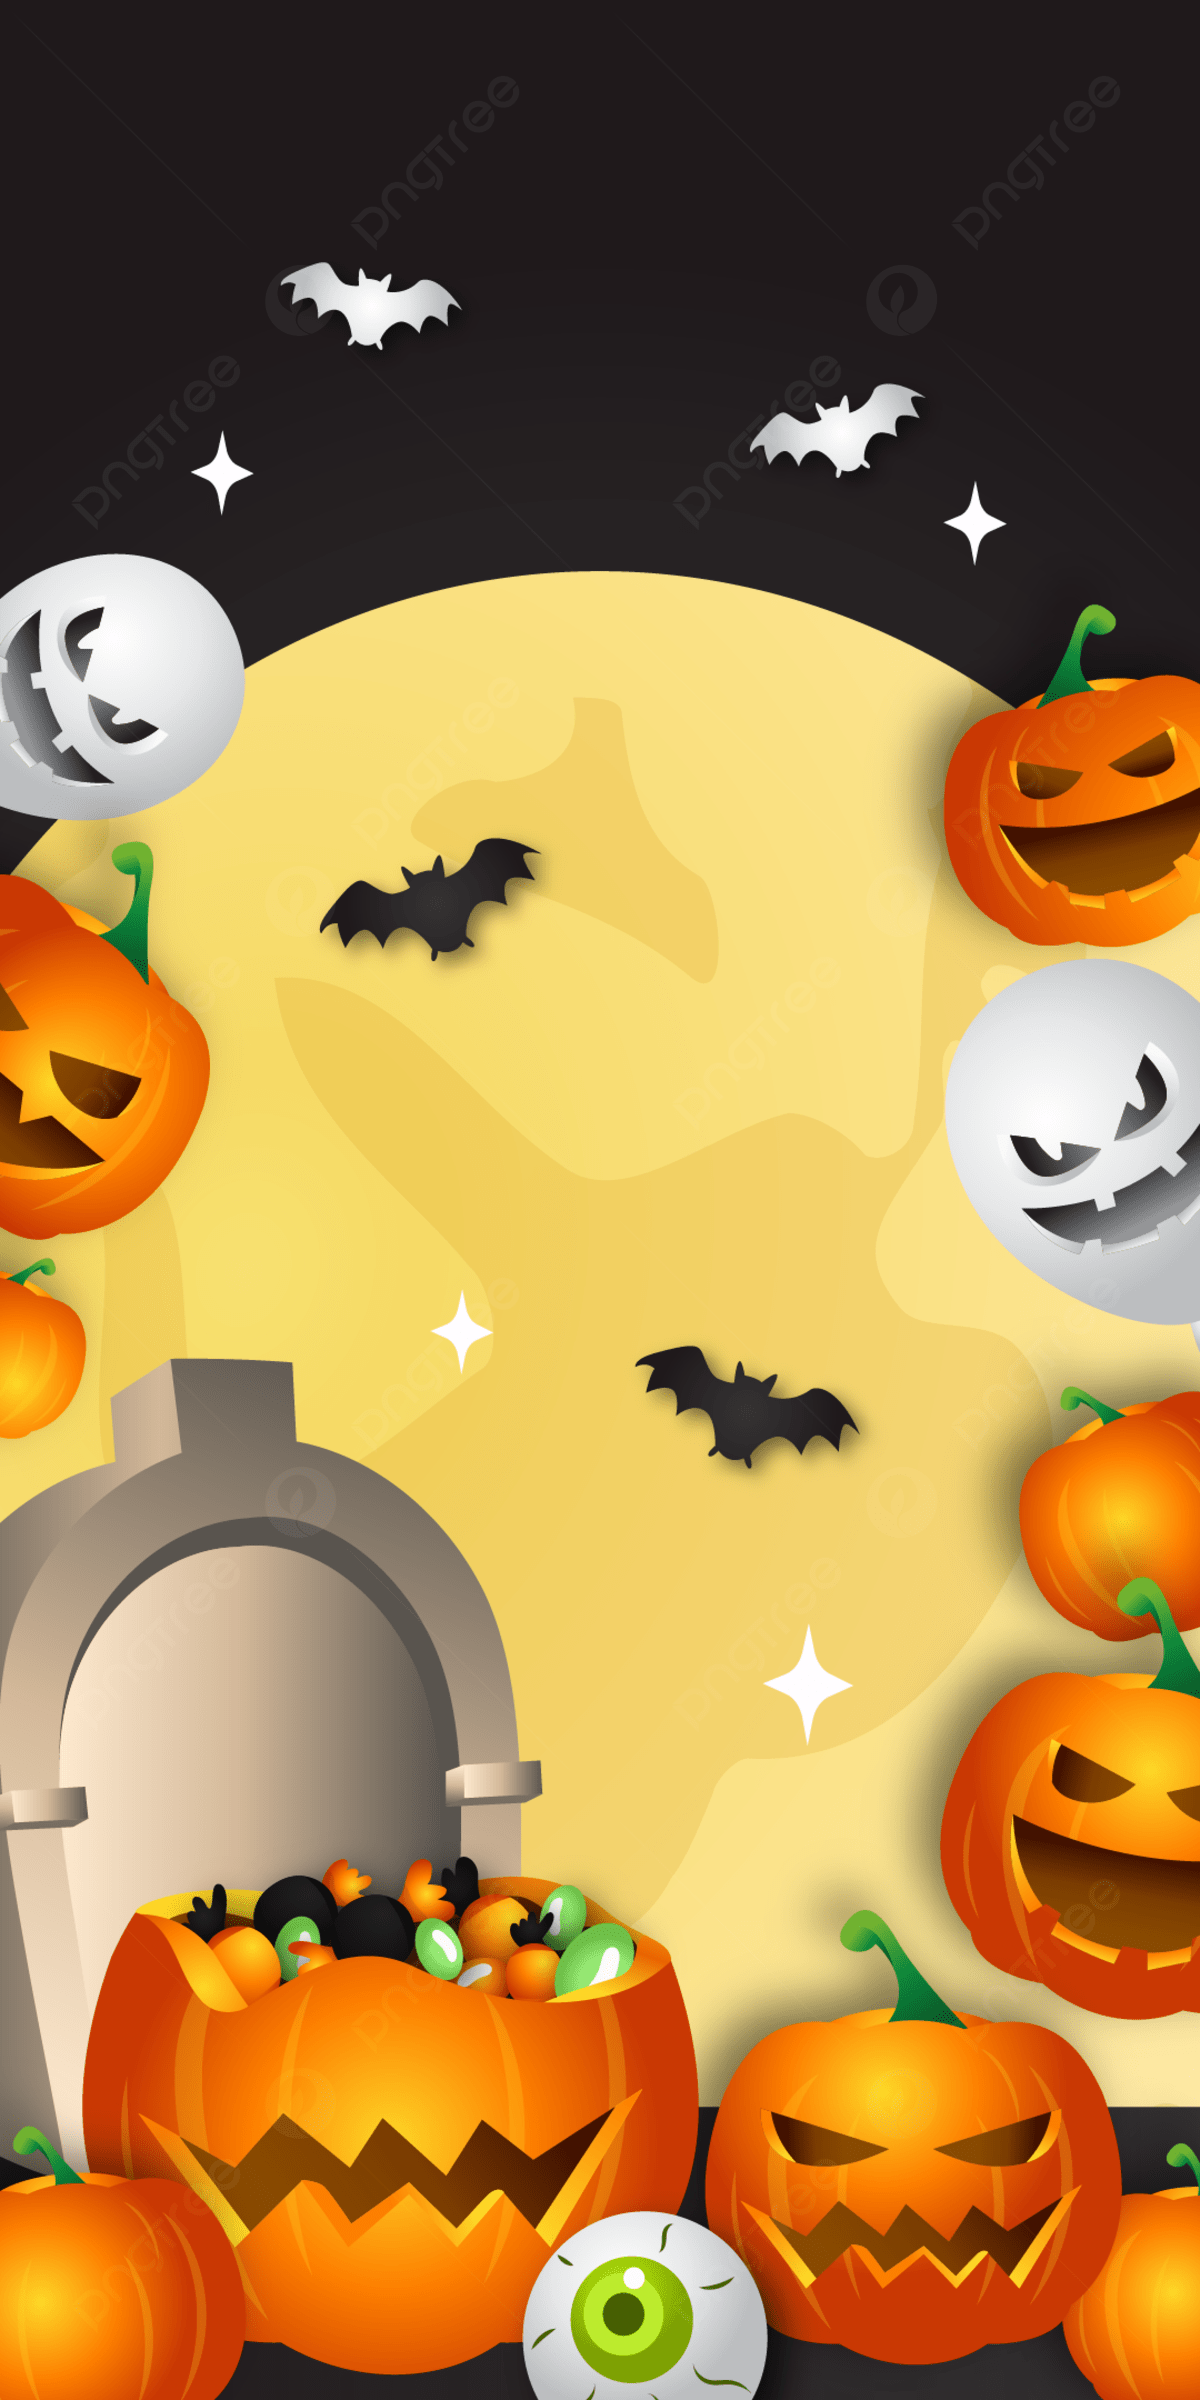 Cute Halloween Wallpaper Free Vector Background, Halloween Wallpaper, Halloween Day, October 31st Background Image for Free Download